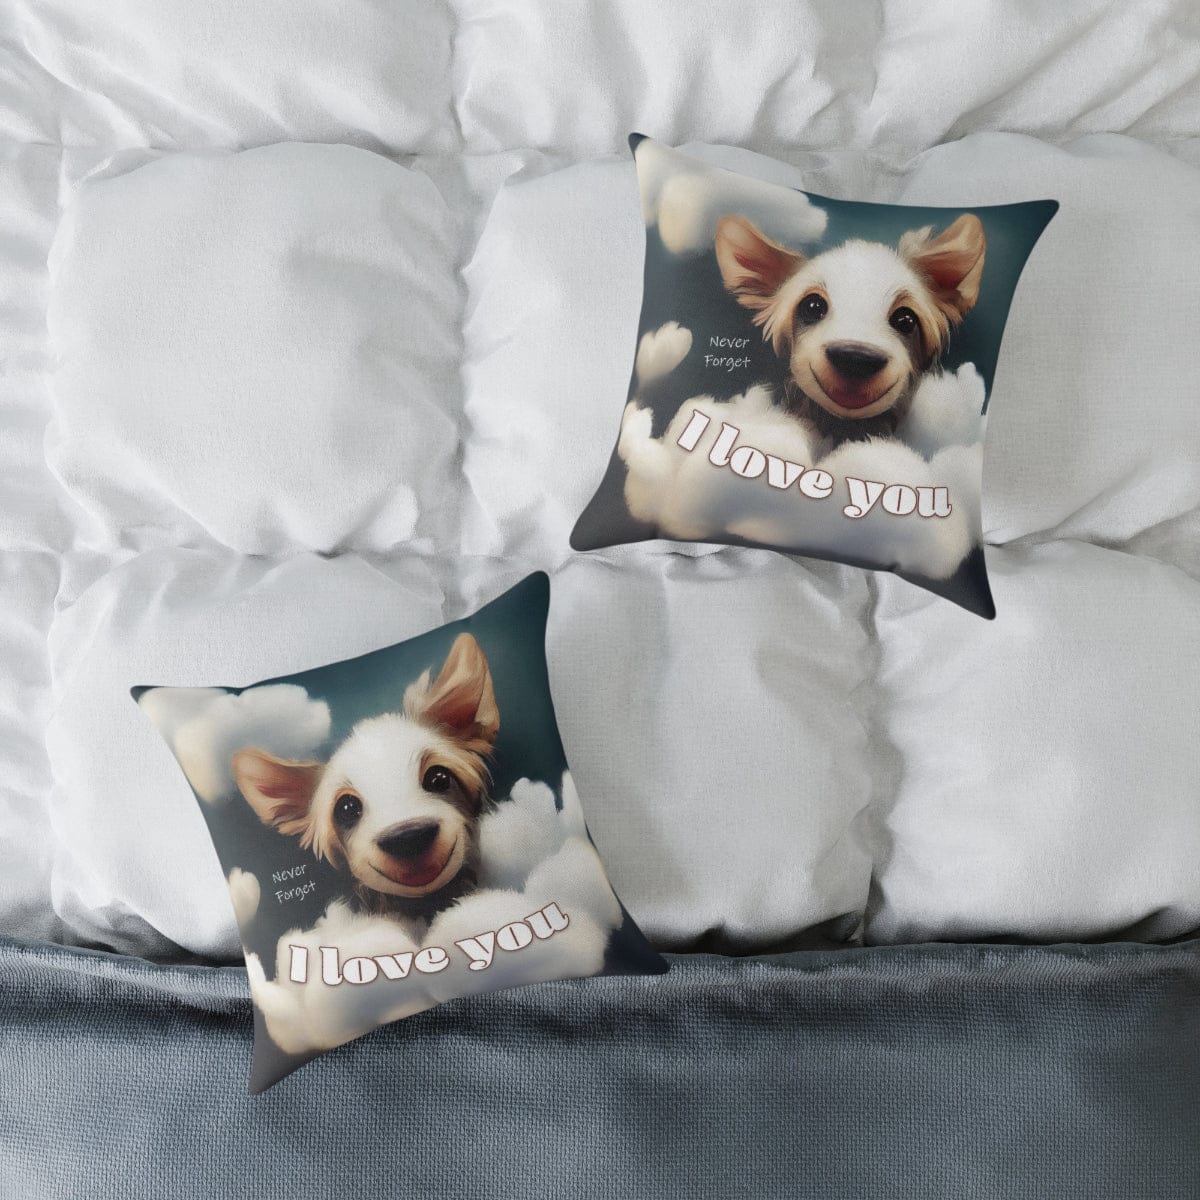 Never Forget I love you - Happy Puppy Pillow - Spun Polyester